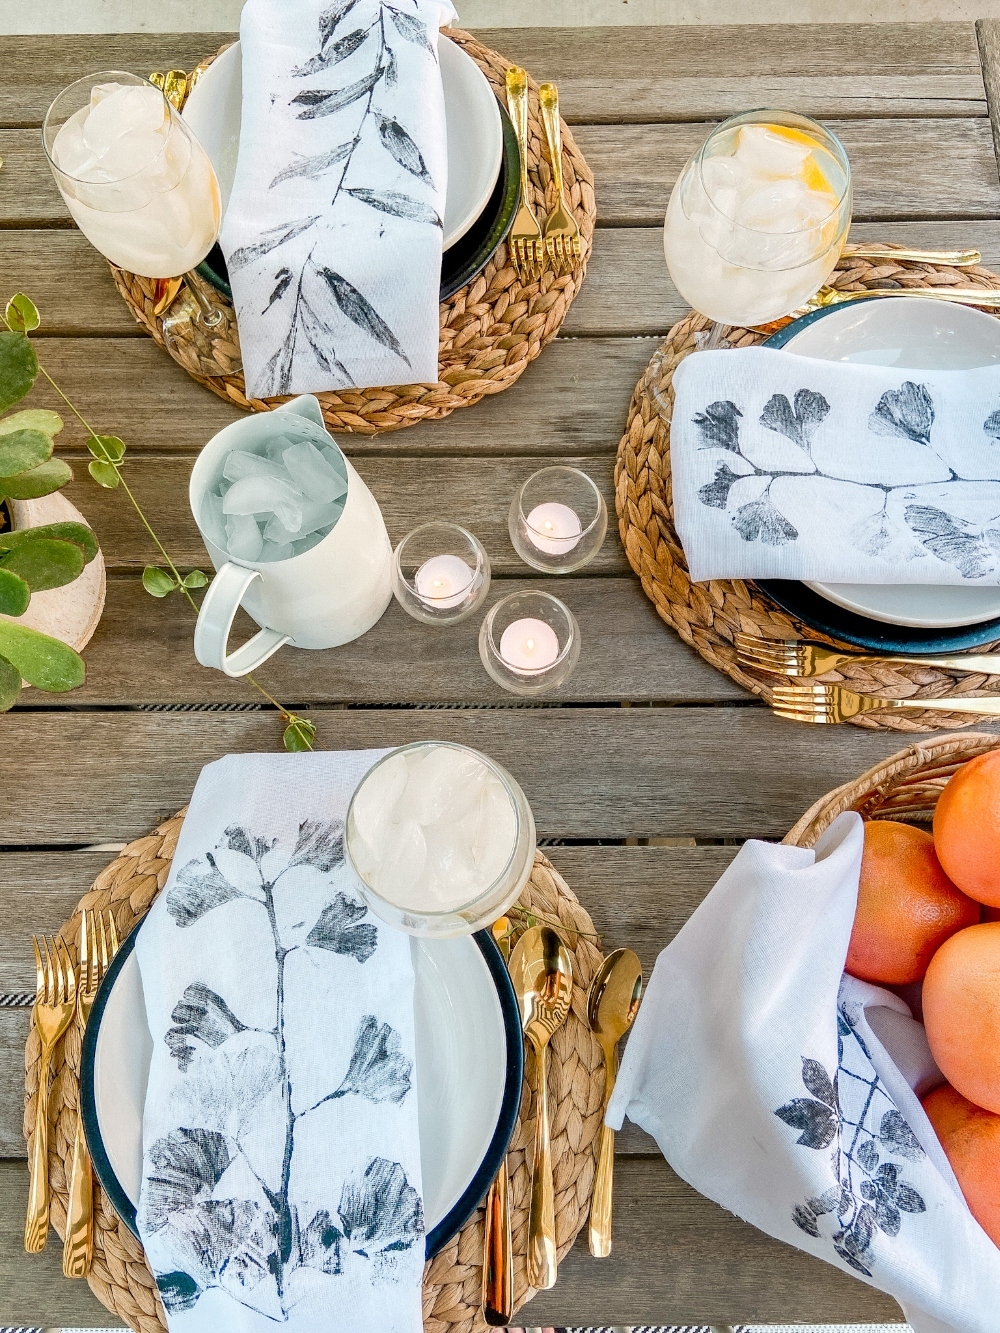 Dollar Store Stamped Leaf Napkins. Dress up your Autumn table by creating DIY stamped napkins with leaves from your neighborhood or a special place! 